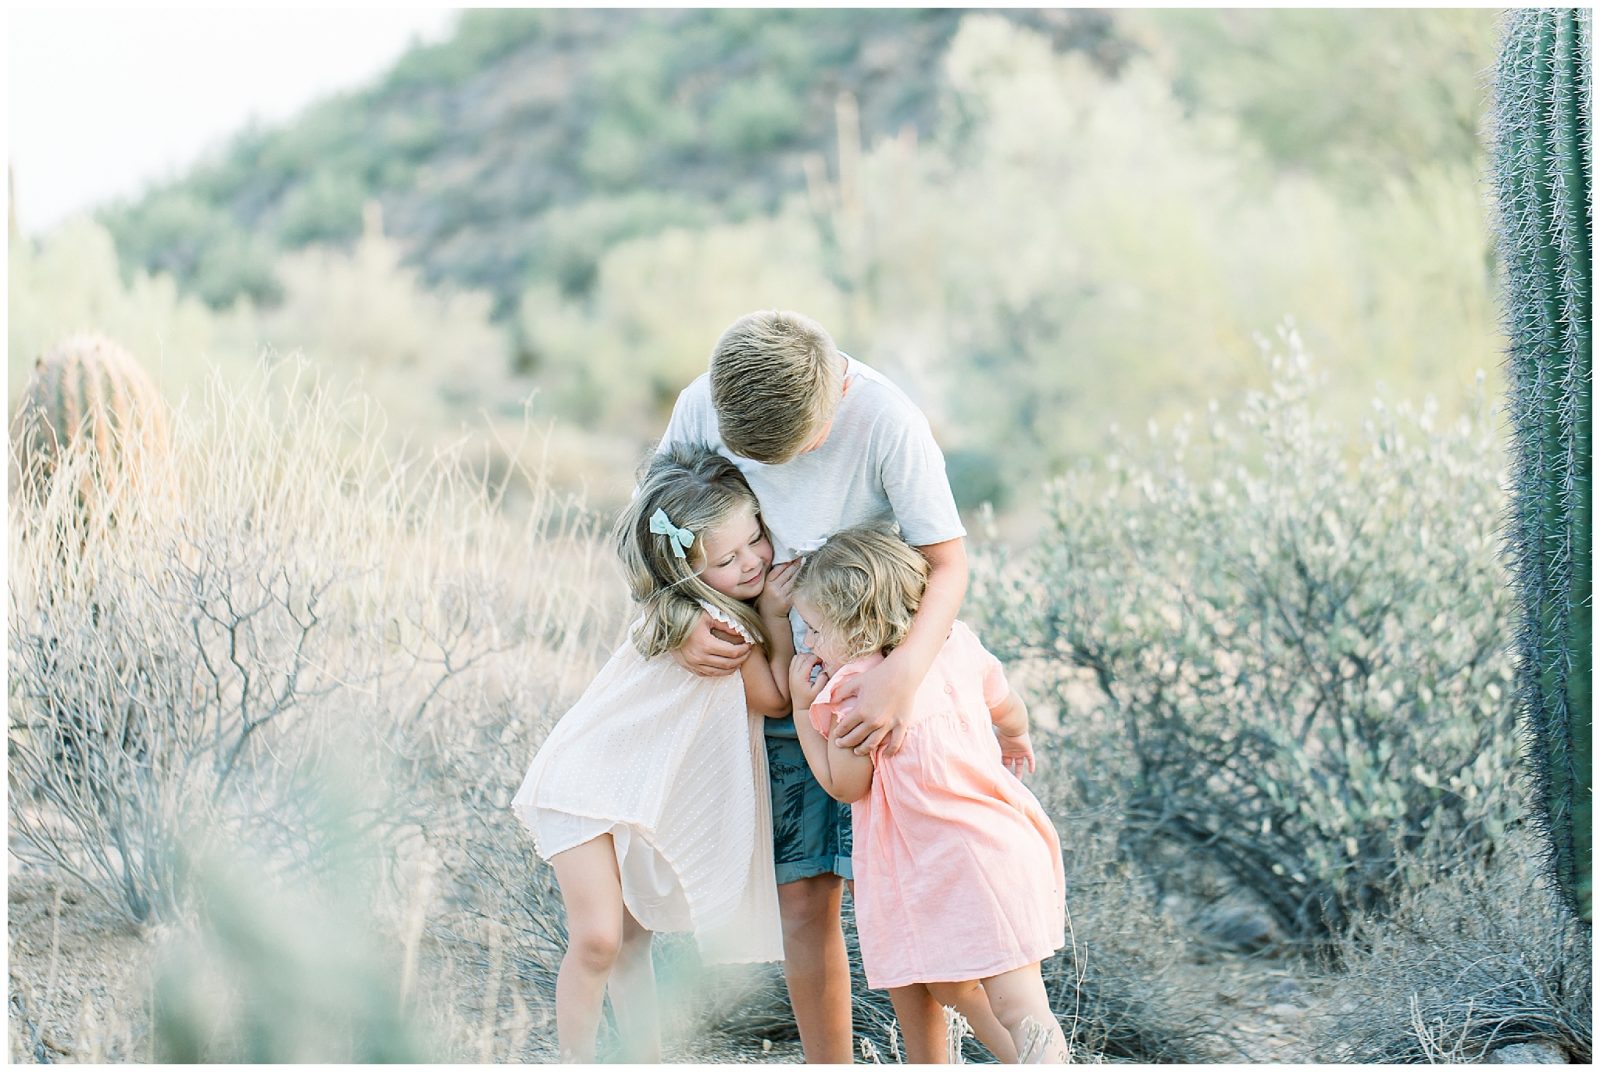 Mesa, Arizona Desert Family Session at the Wind Cave Trail by Aly Kirk Photo